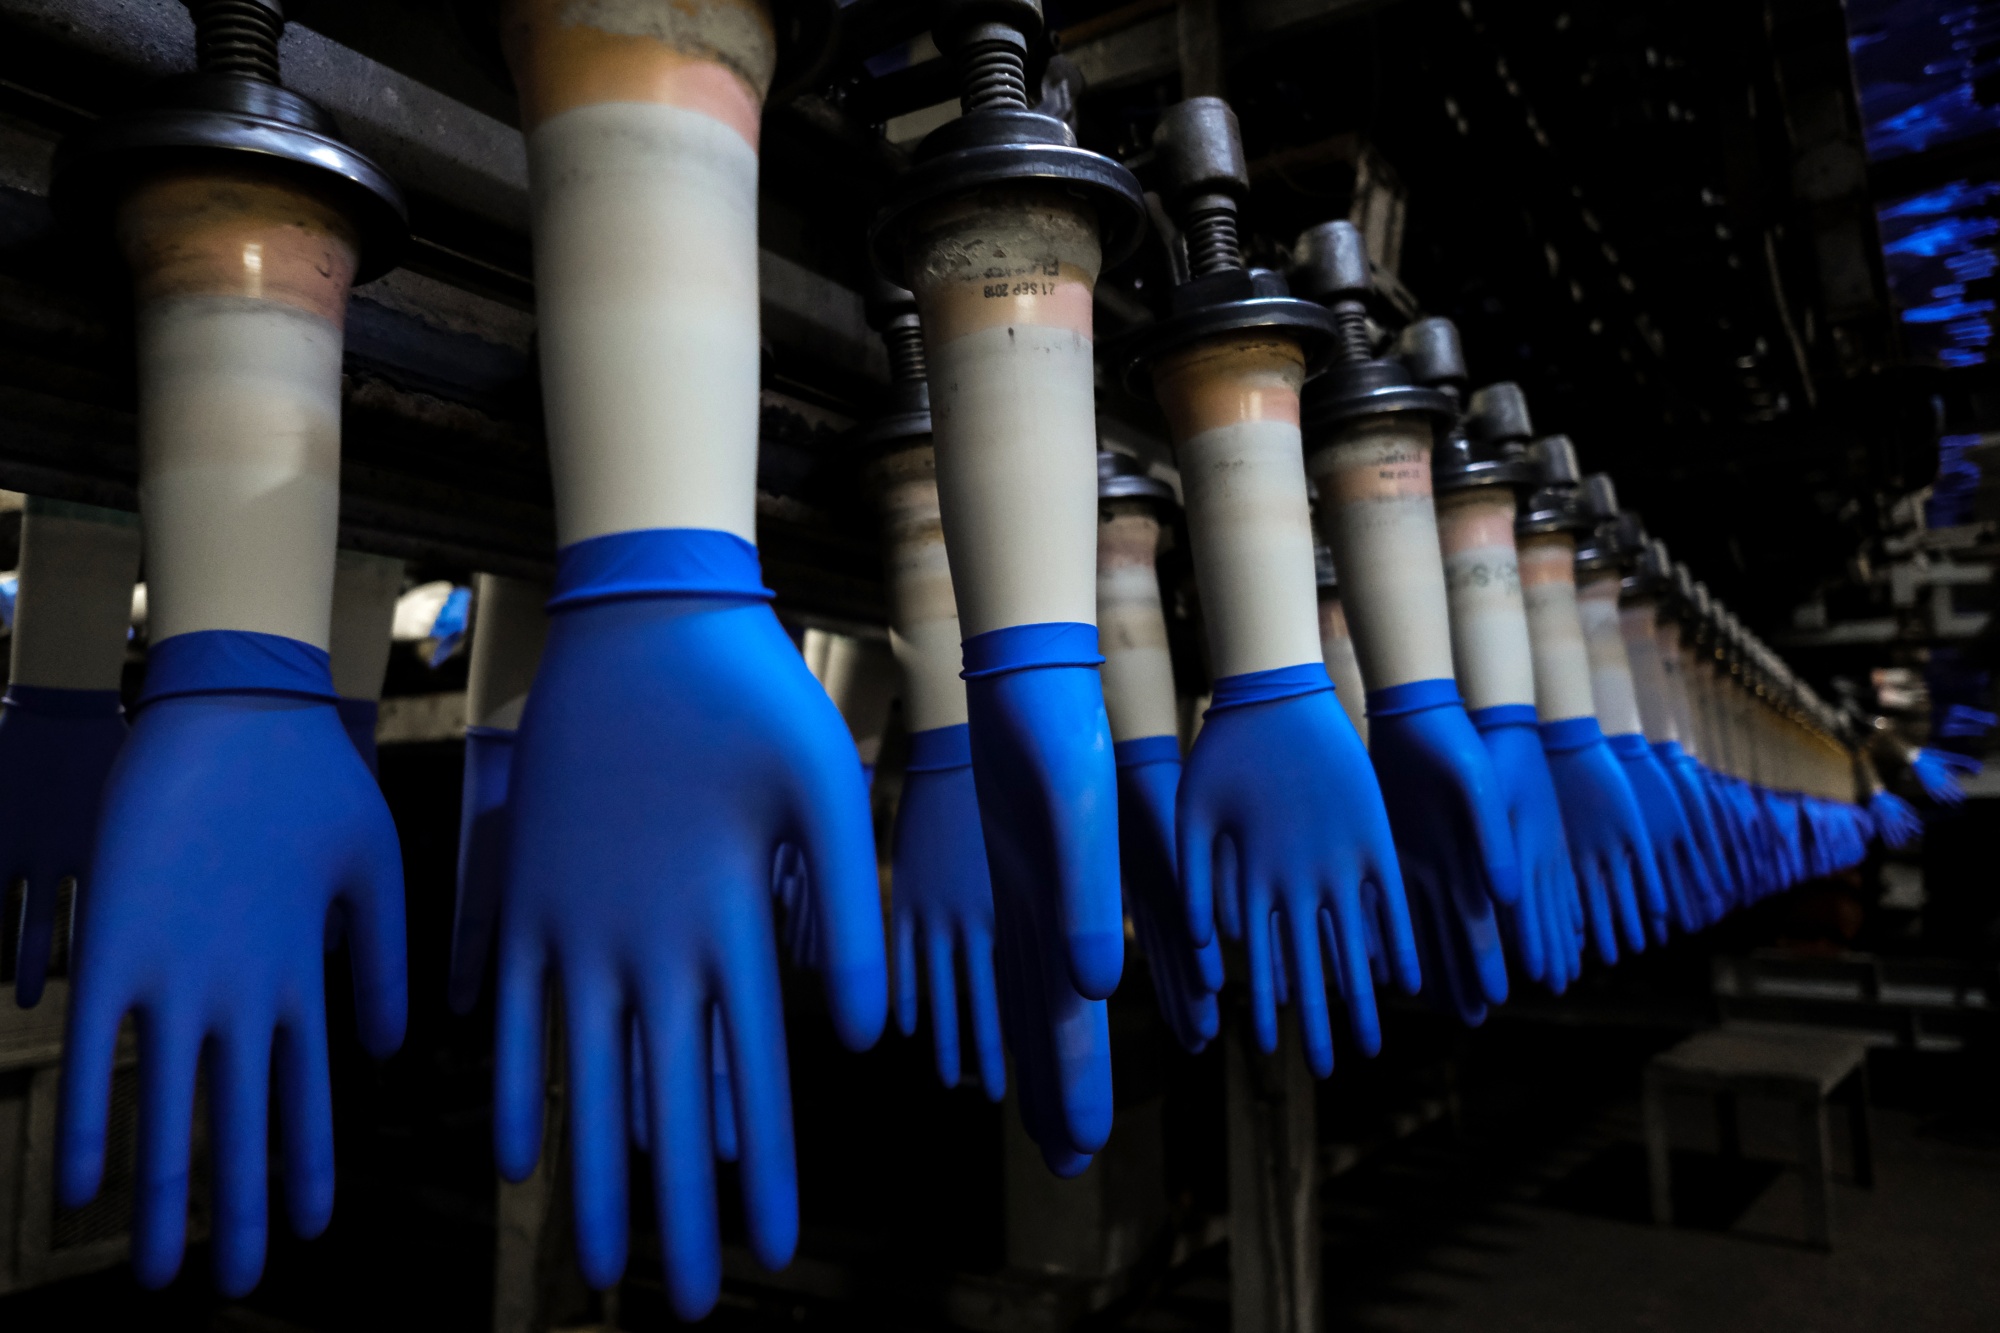 Top Glove Corp. has more than 21,000 employees that churn out 90 billion gloves per year.